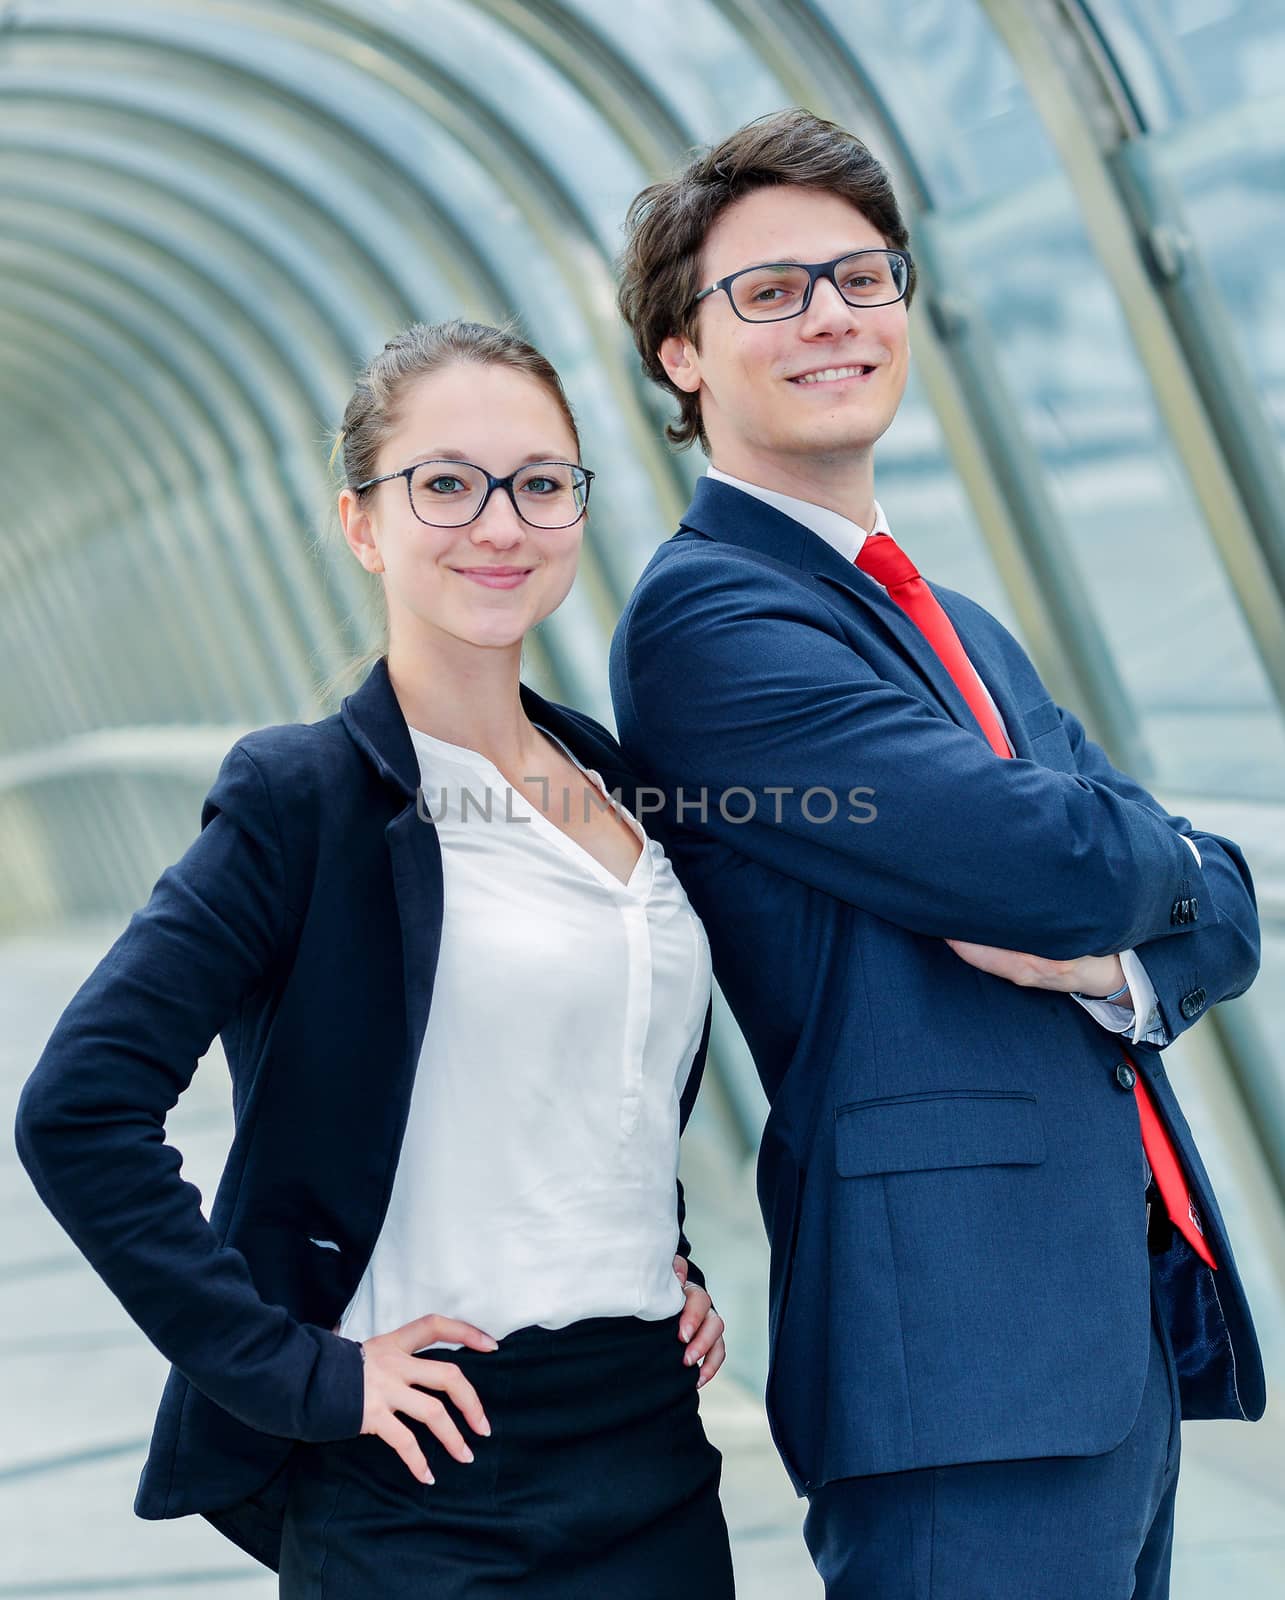 expressive portrait Junior executives of company crossed arms by pixinoo